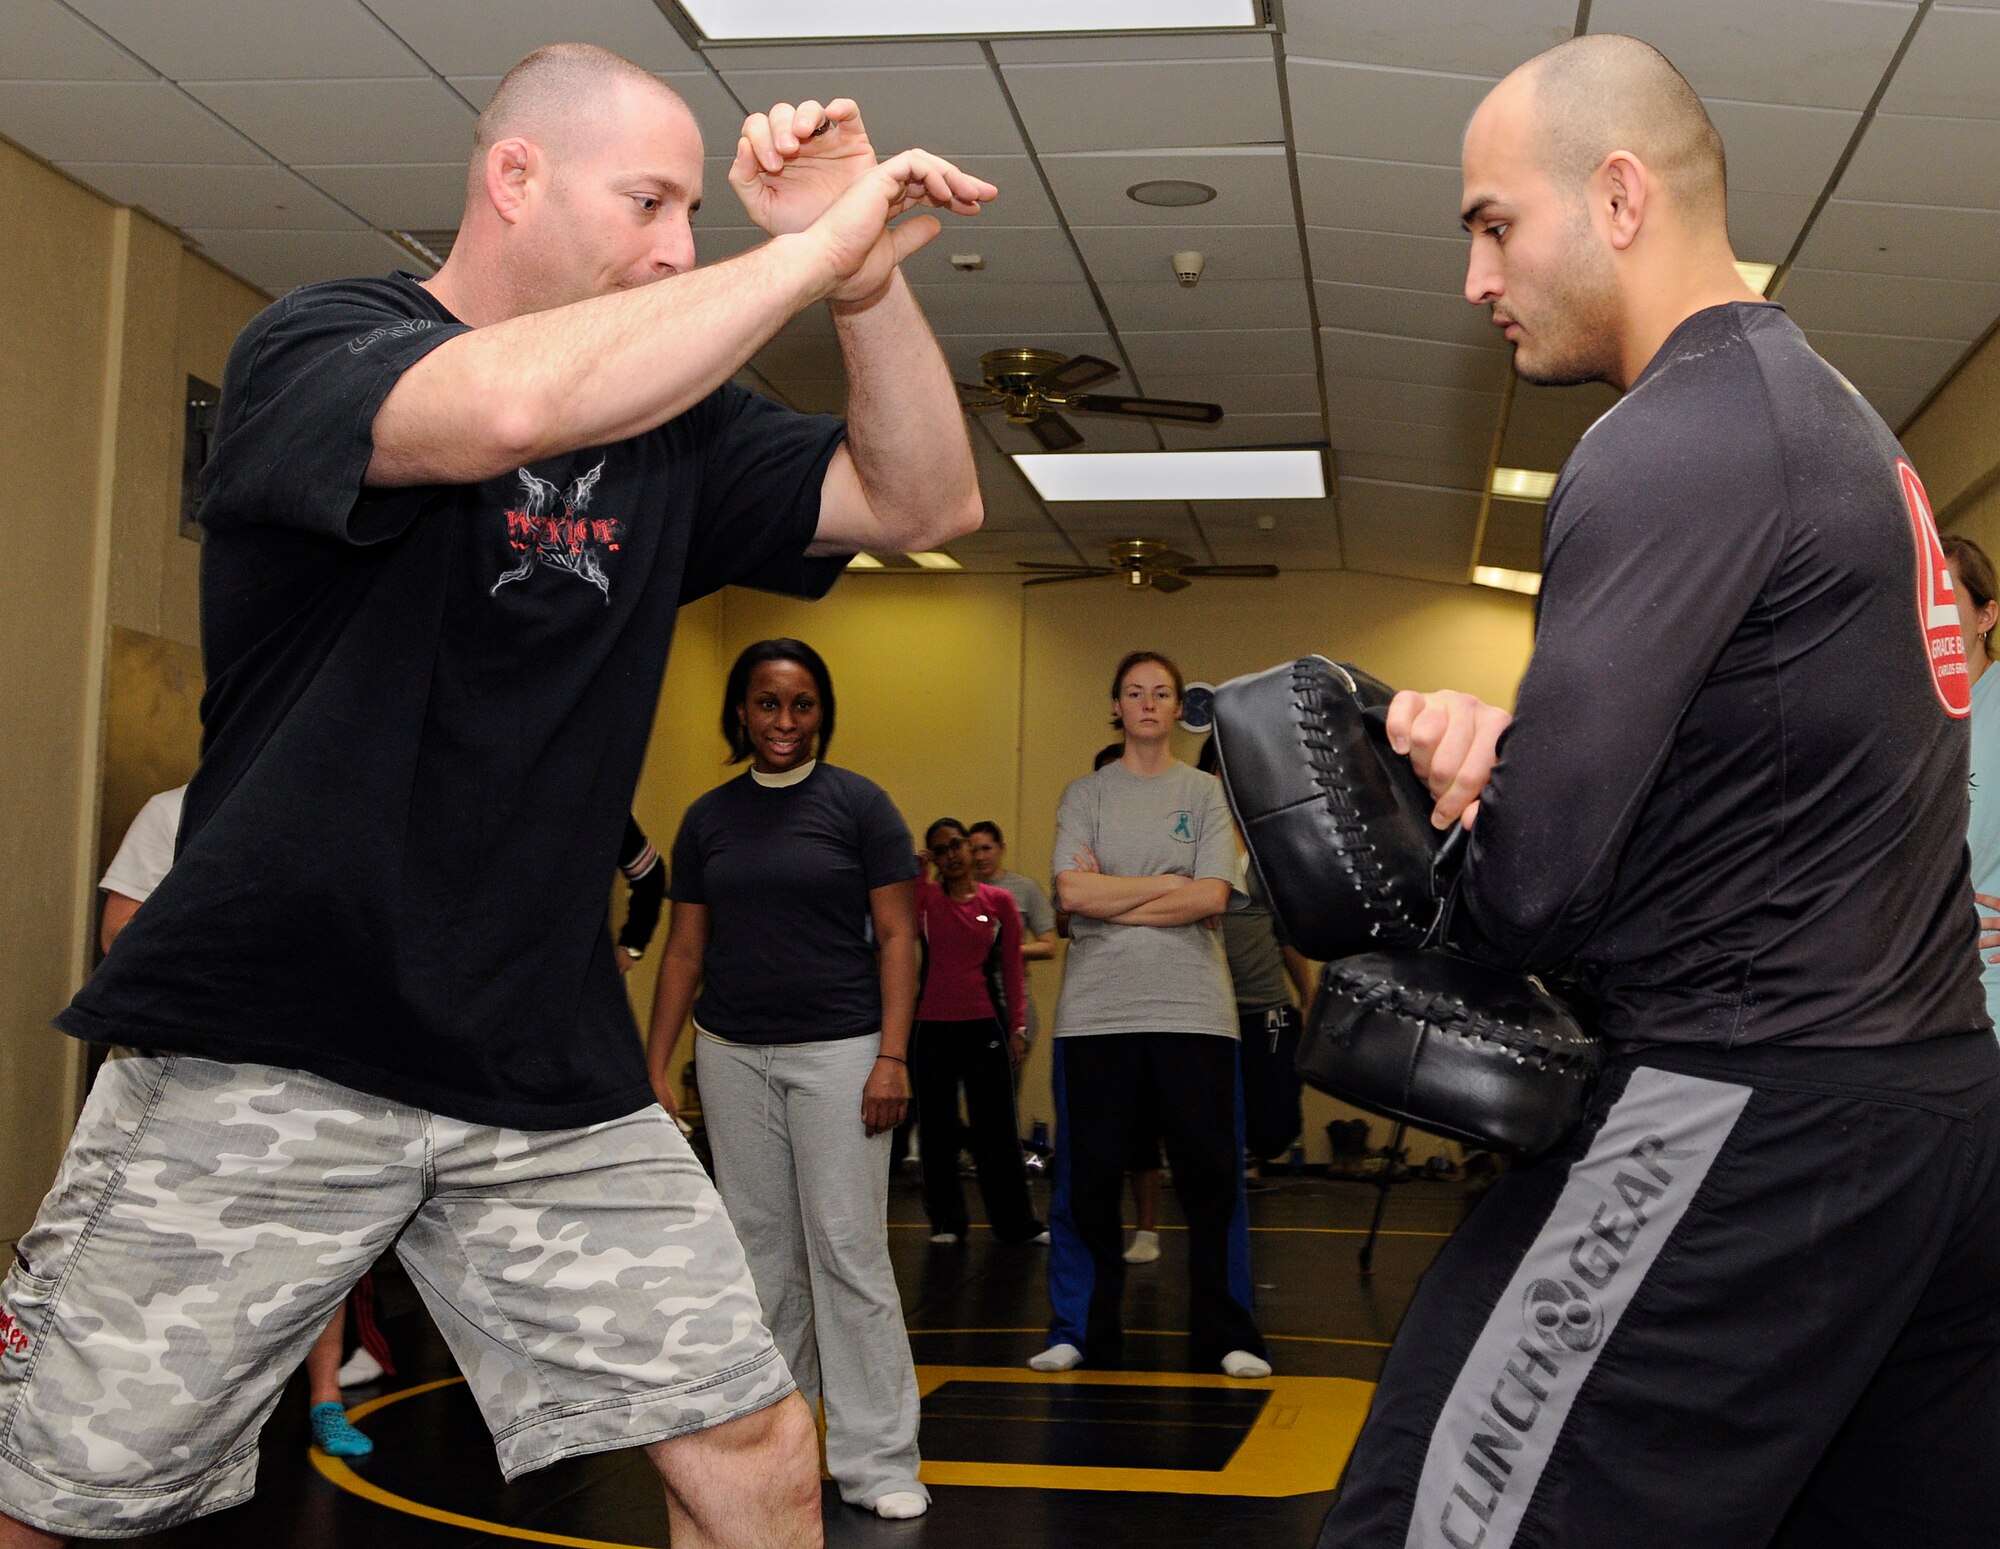 SPANGDAHLEM AIR BASE, Germany – Master Sgt. John Cammarata, left, 52nd Civil Engineer Squadron member and mixed martial arts coach, and Jesus Carlos, husband of Staff Sgt. Leonor Carlos, 52nd Medical Operations Squadron, demonstrate how to strike a person’s abdomen using knees during a self-defense class at Skelton Memorial Fitness Center March 26. This class was among many events focused on preventing sexual assault during Sexual Assault Awareness Month. (U.S. Air Force photo/Senior Airman Benjamin Wilson)